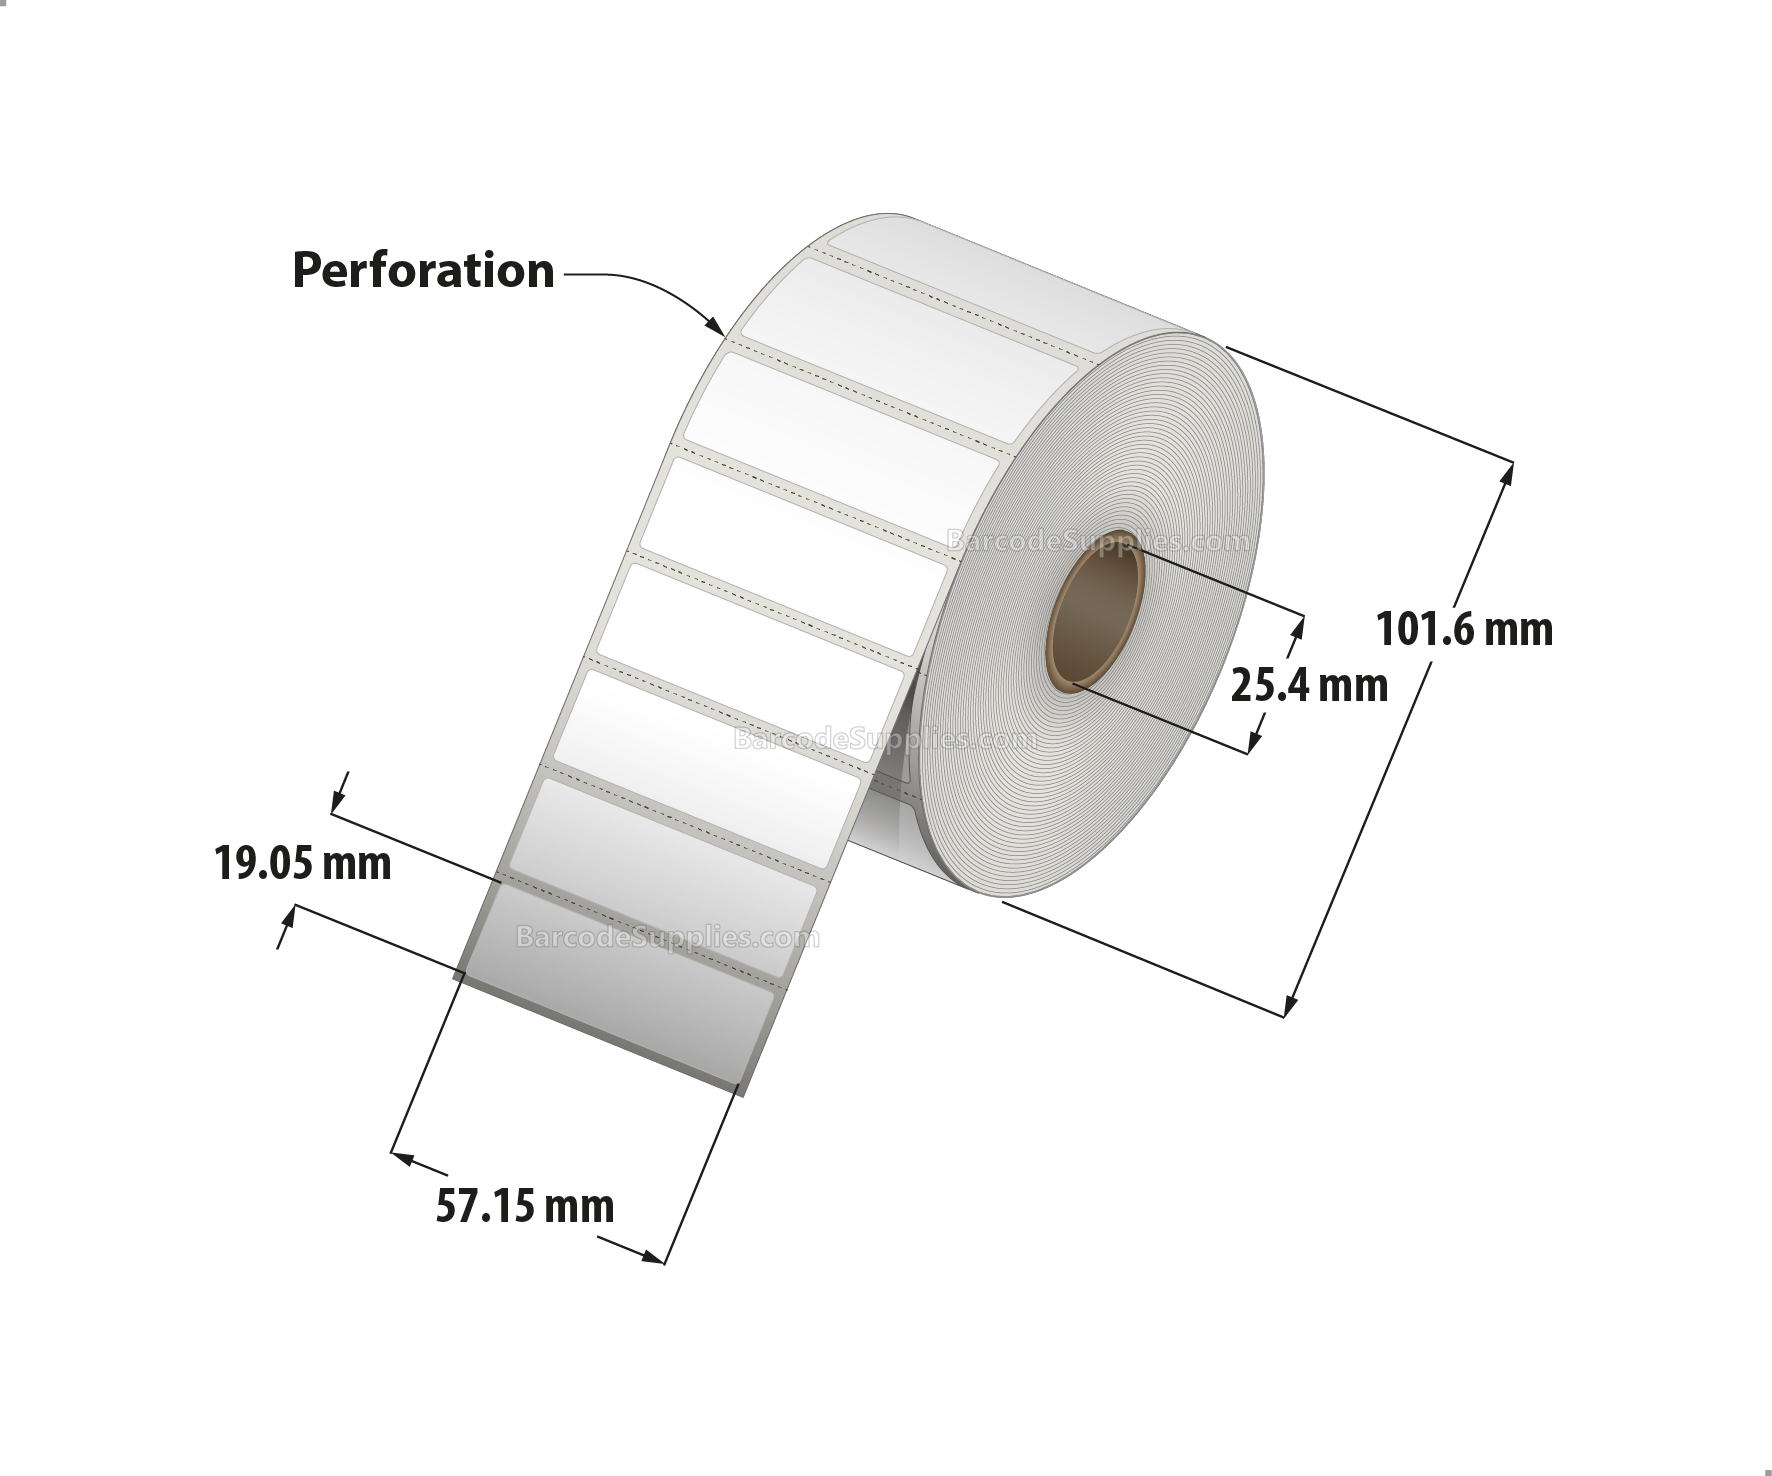 2.25 x 0.075 Thermal Transfer White Labels With Rubber Adhesive - Perforated - 1780 Labels Per Roll - Carton Of 12 Rolls - 21360 Labels Total - MPN: RTT4-225075-1P